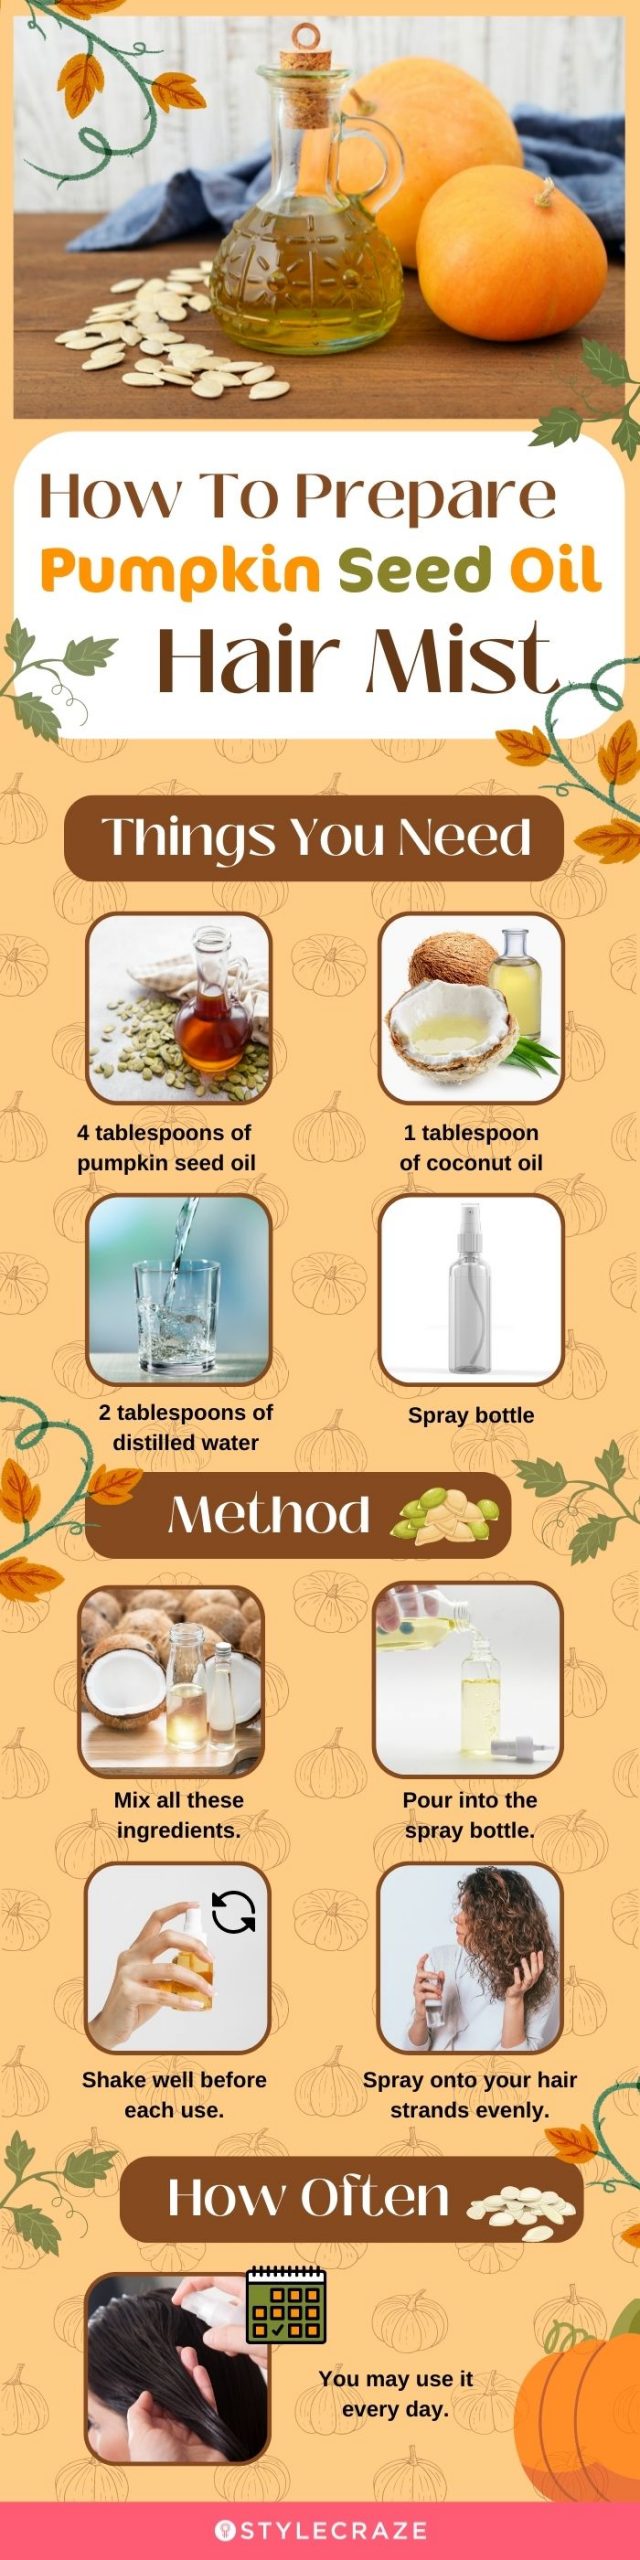 how to prepare pumpkin seed oil hair mist [infographic]